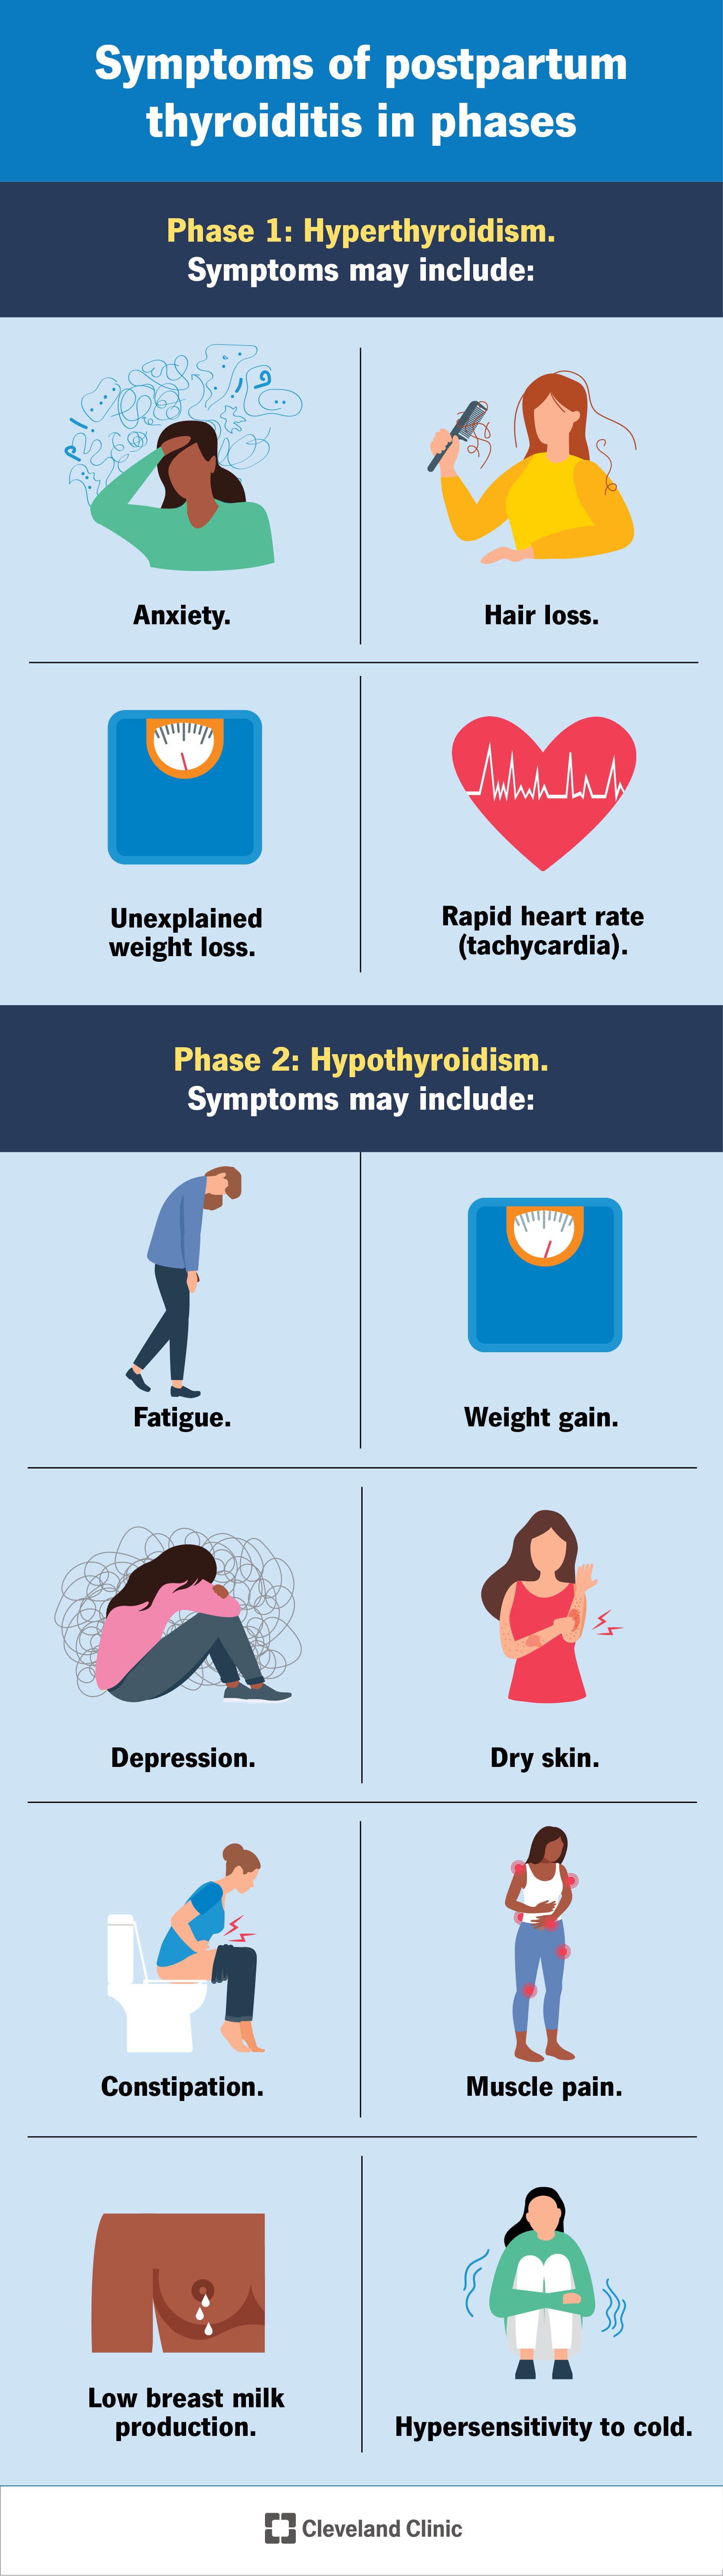 Phases one (hyperthyroidism) symptoms include anxiety and hair loss. Symptoms of phase 2 (hypothyroidism) include weight gain and dry skin.